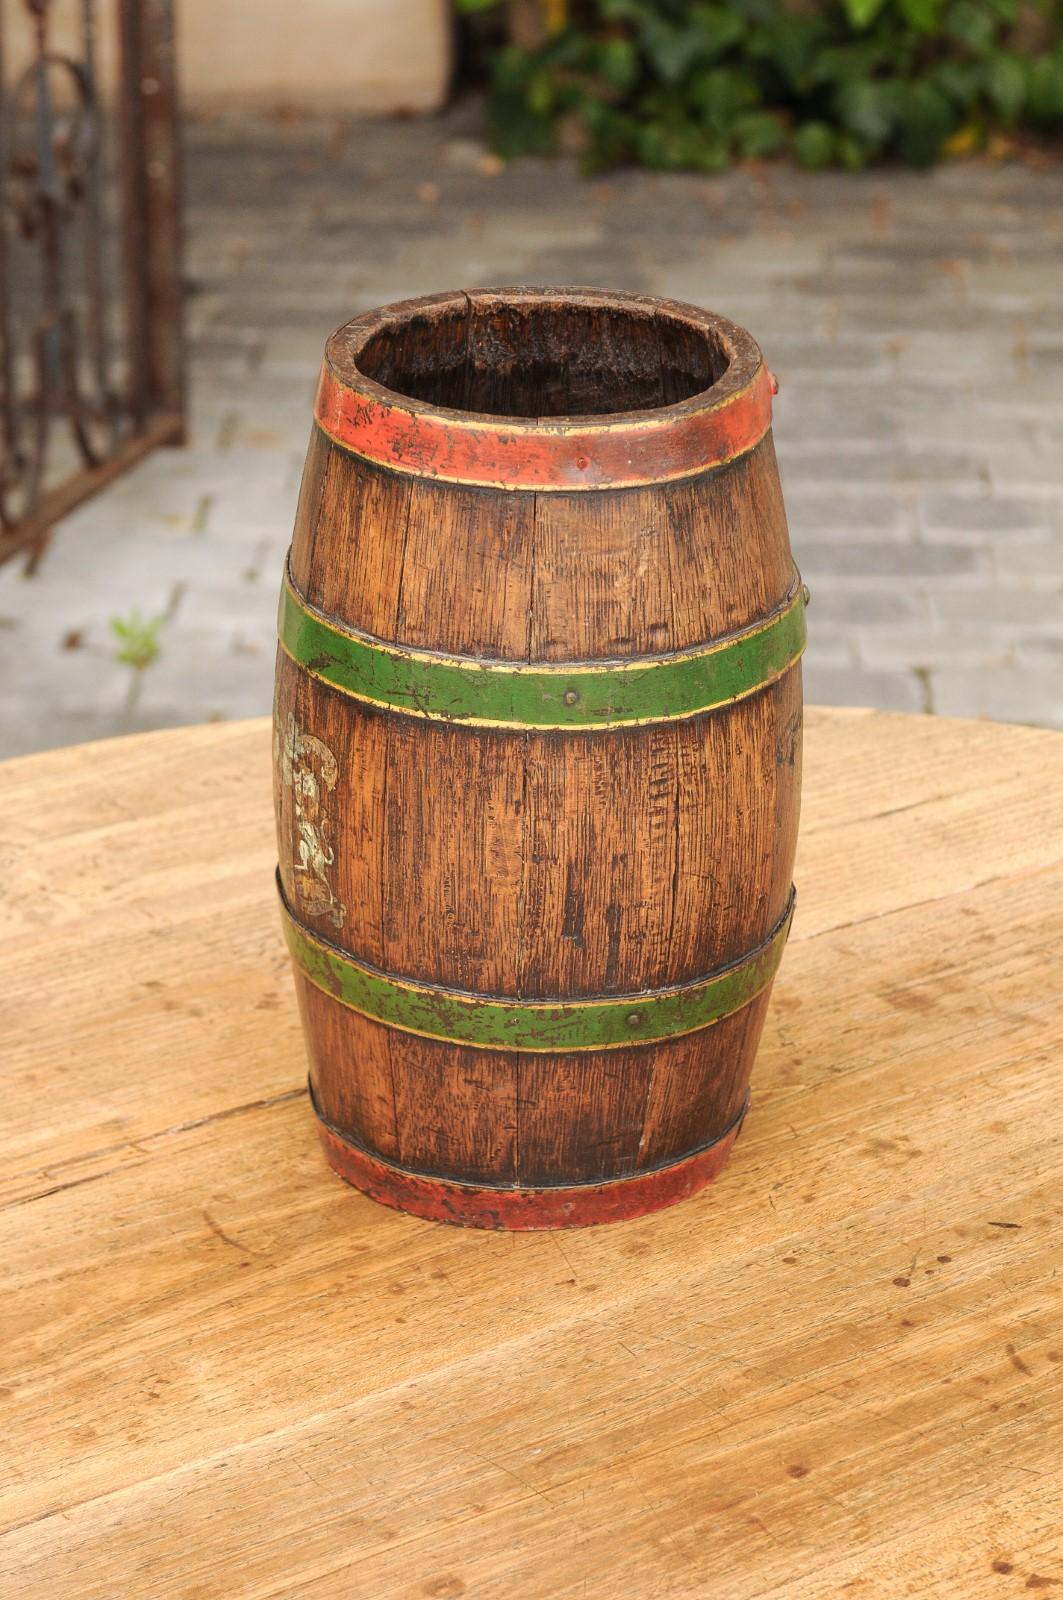 Petite 1900s Rustic English Edwardian Wooden Barrel with Green and Red Accents 4